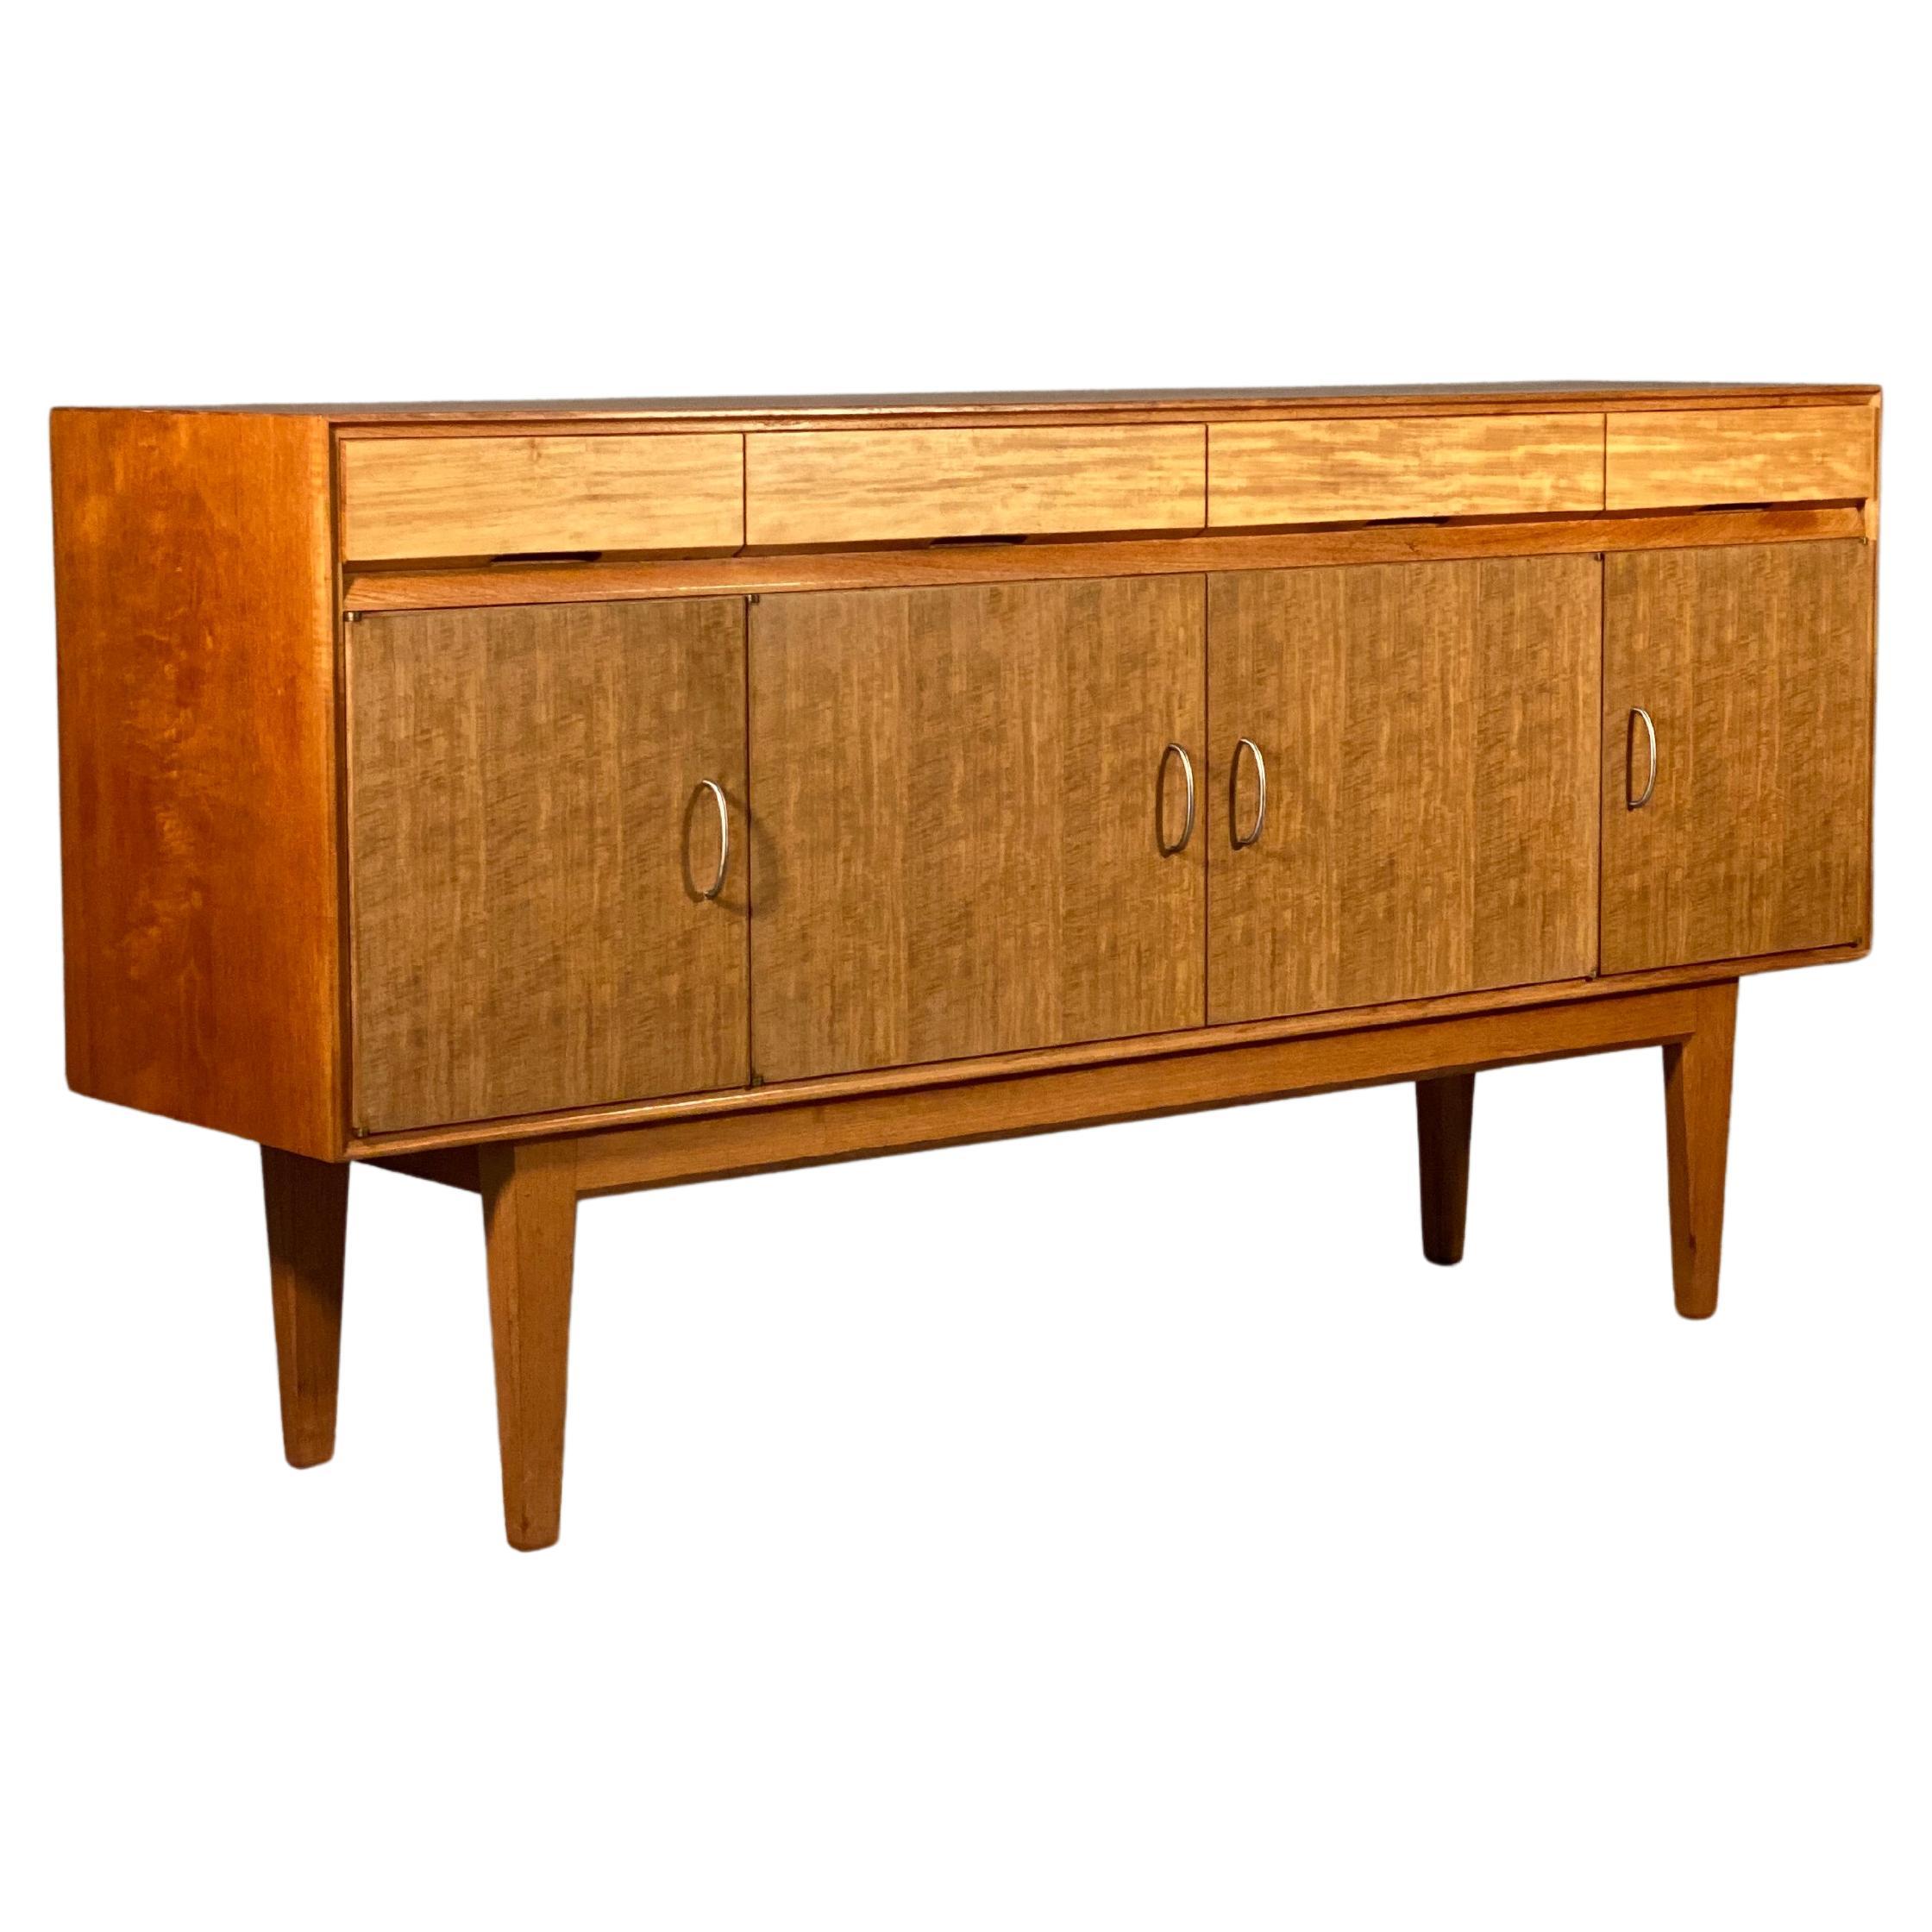 Rare Gordon Russell Sideboard By WH Curly Russell c.1958 For Sale